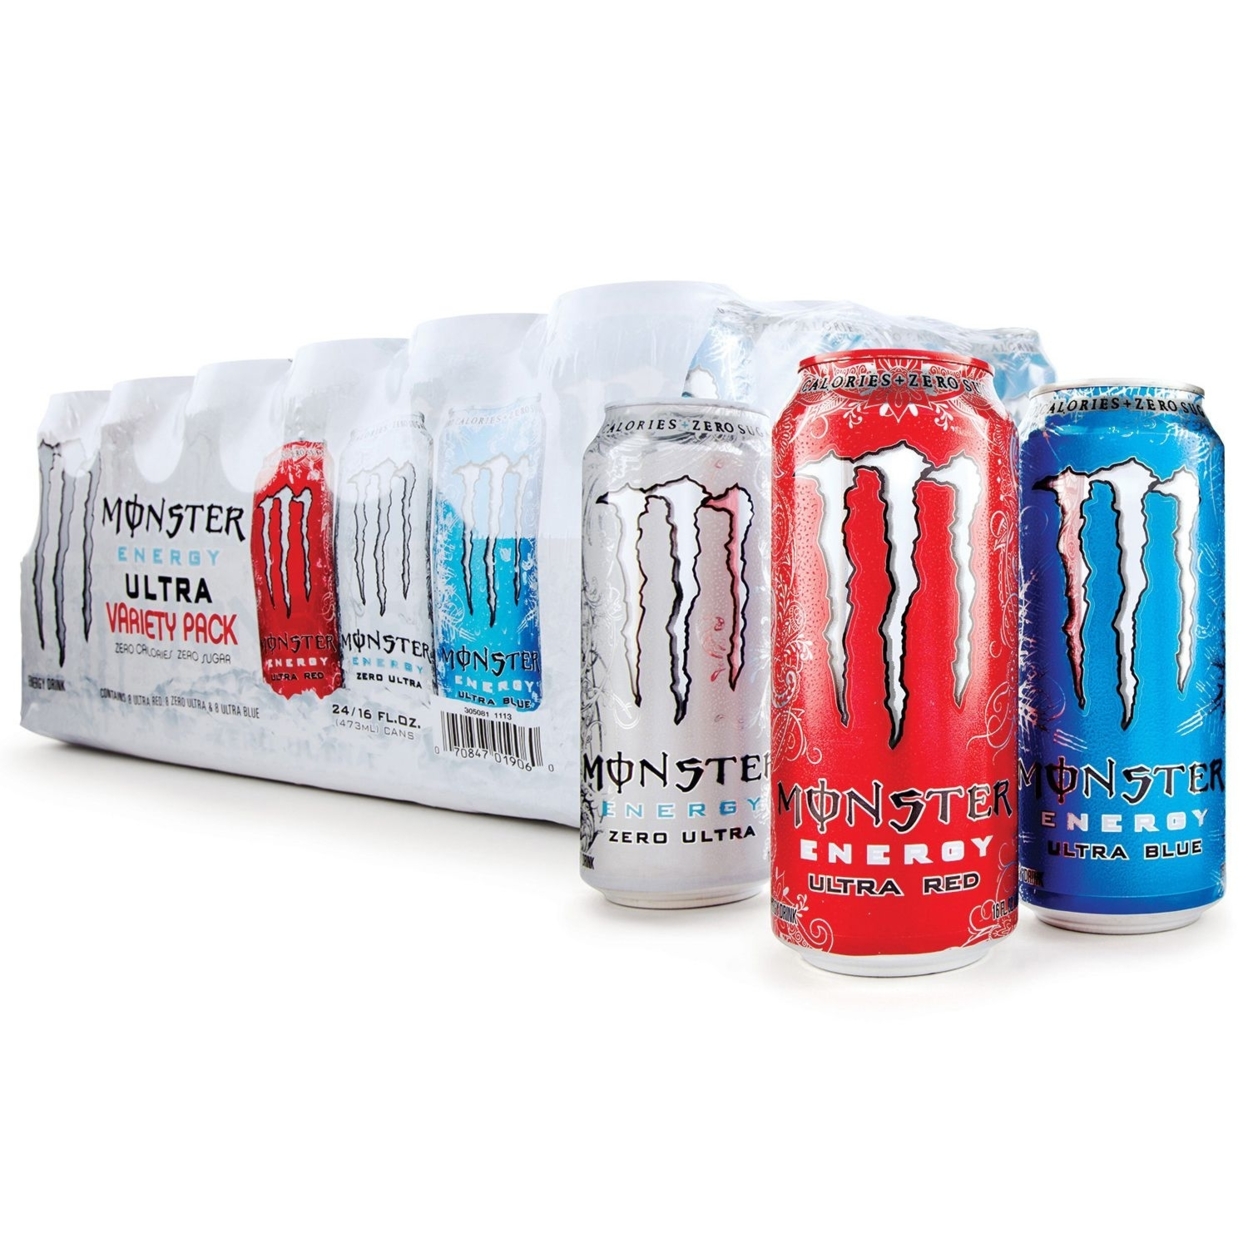 Monster Ultra Variety Pack (16 Ounce Cans, 24 Pack)